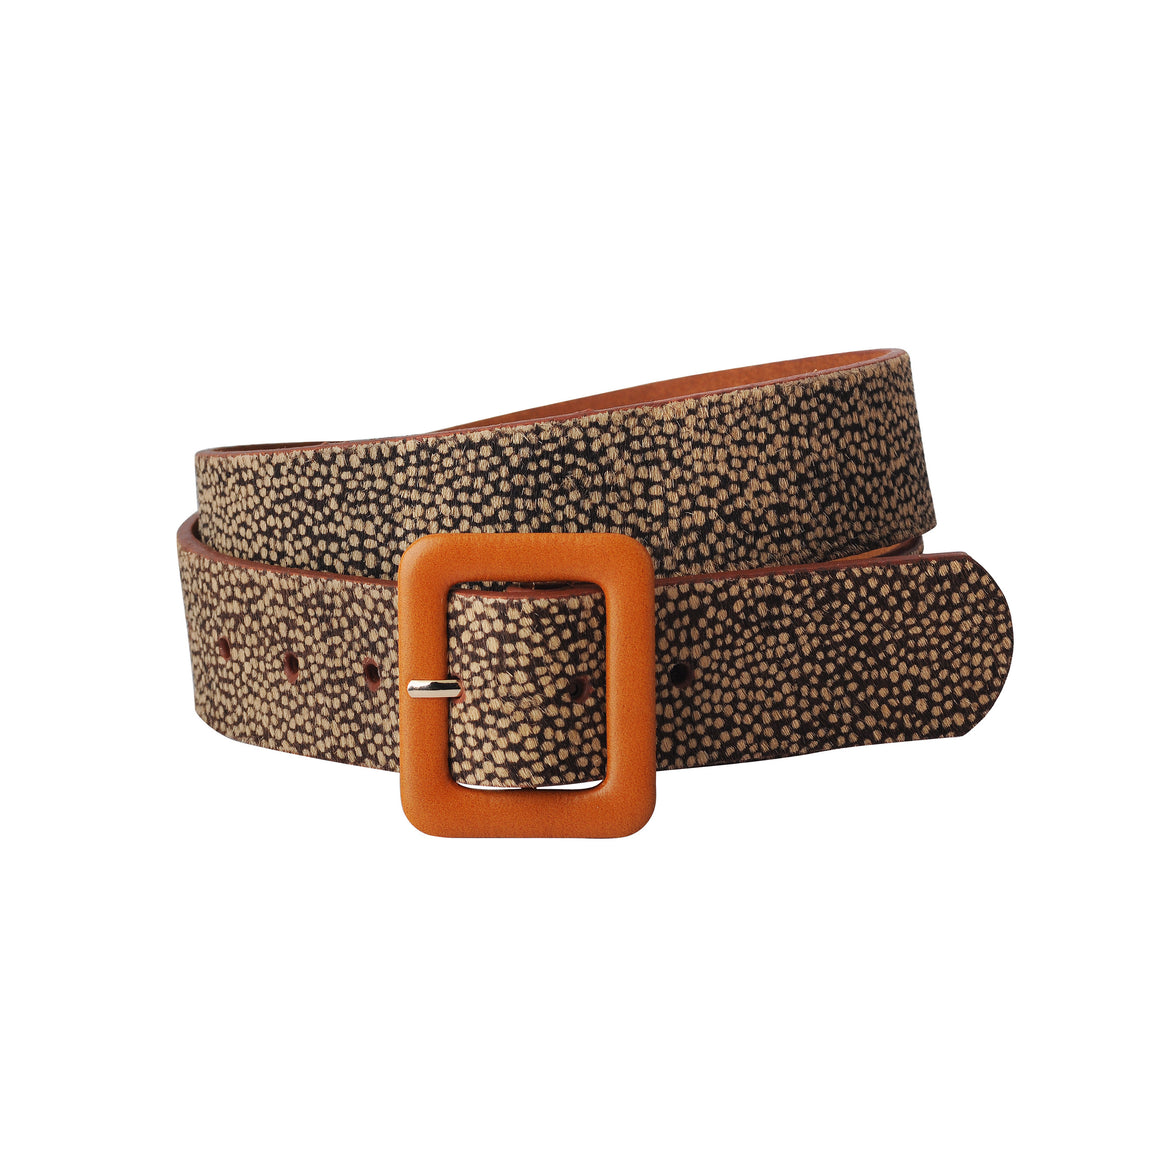 5108 - Spotted Giraffe Print Calf Hair Belt with PU Leather Buckle